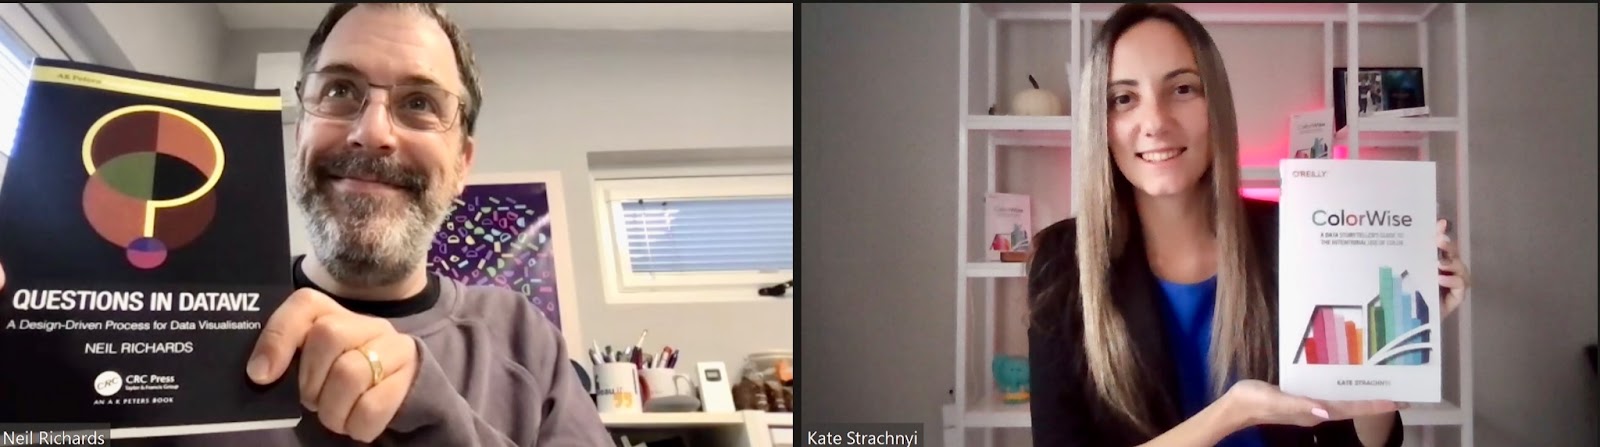 Side-by-side screenshots of reviewer Neil Richards (left) and ColorWise author Kate Strachnyi.